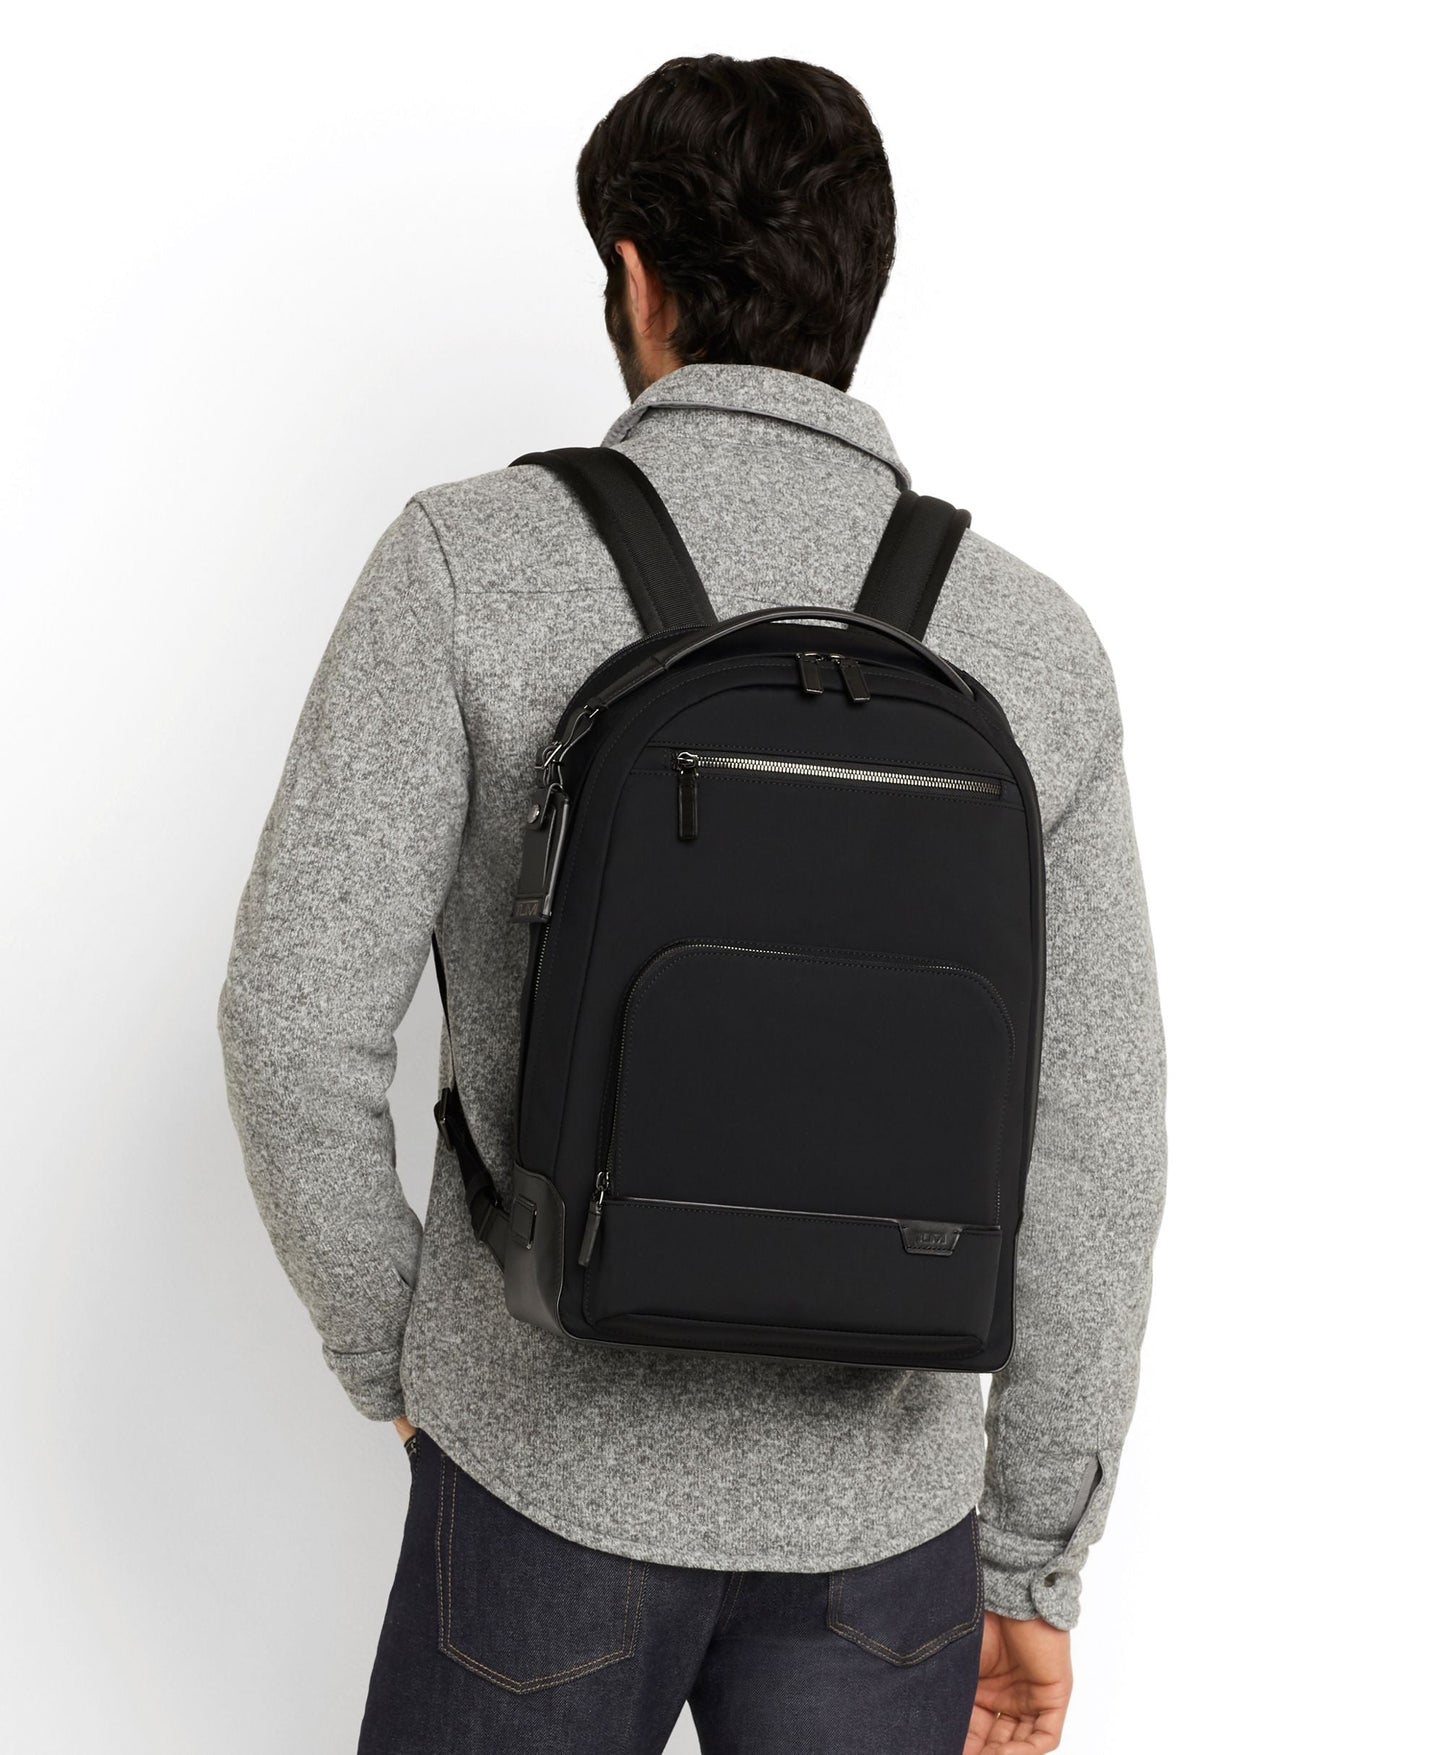 Best laptop backpack for work and travel